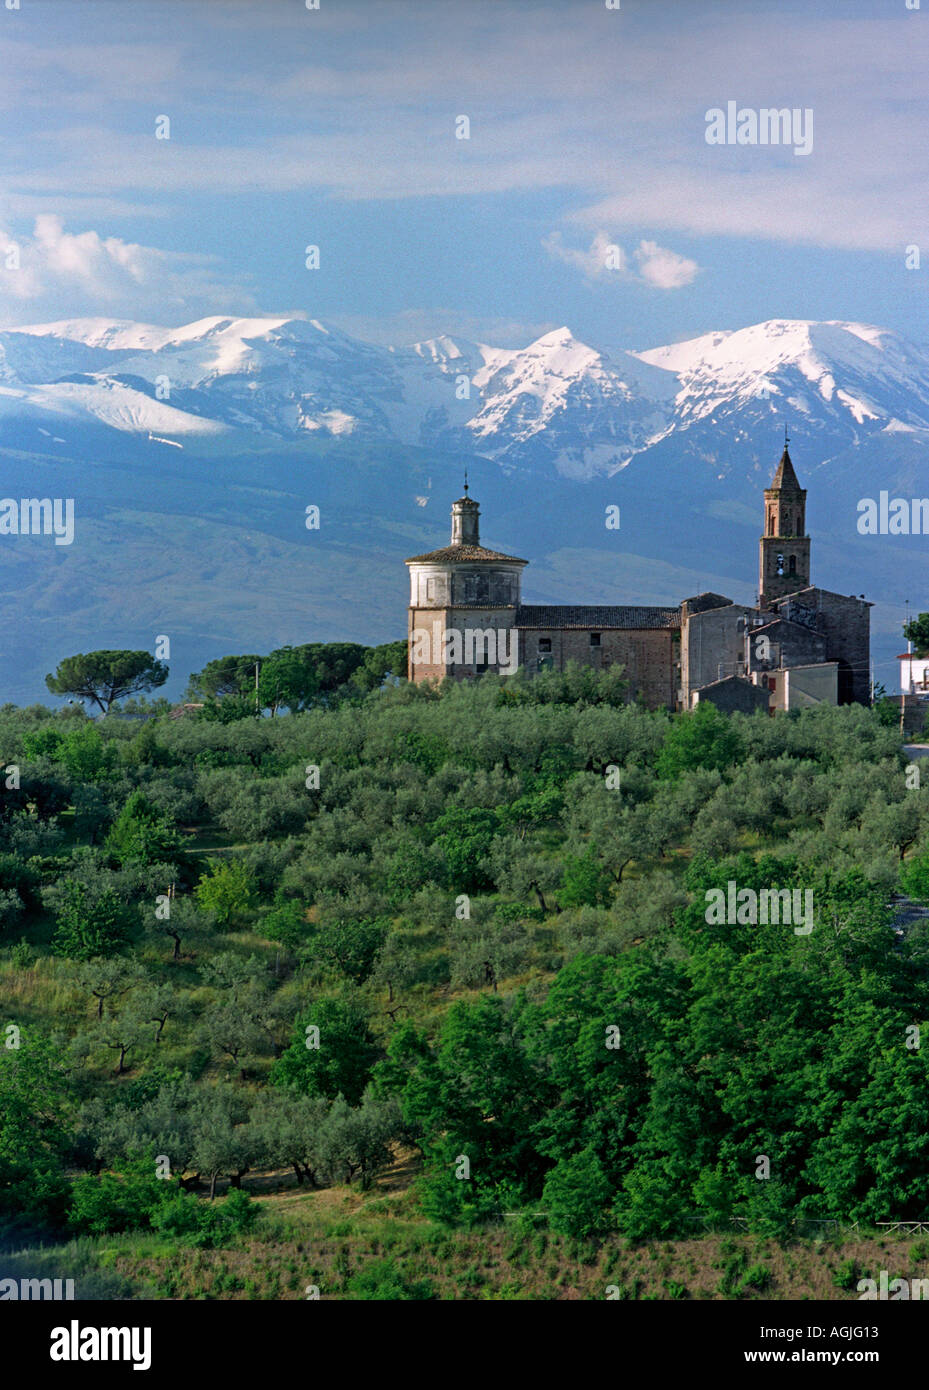 The Appenine Mountains of the Gran Sasso overlook a church at Loreto Aprutino in the Abbruzzo region of Italy Stock Photo